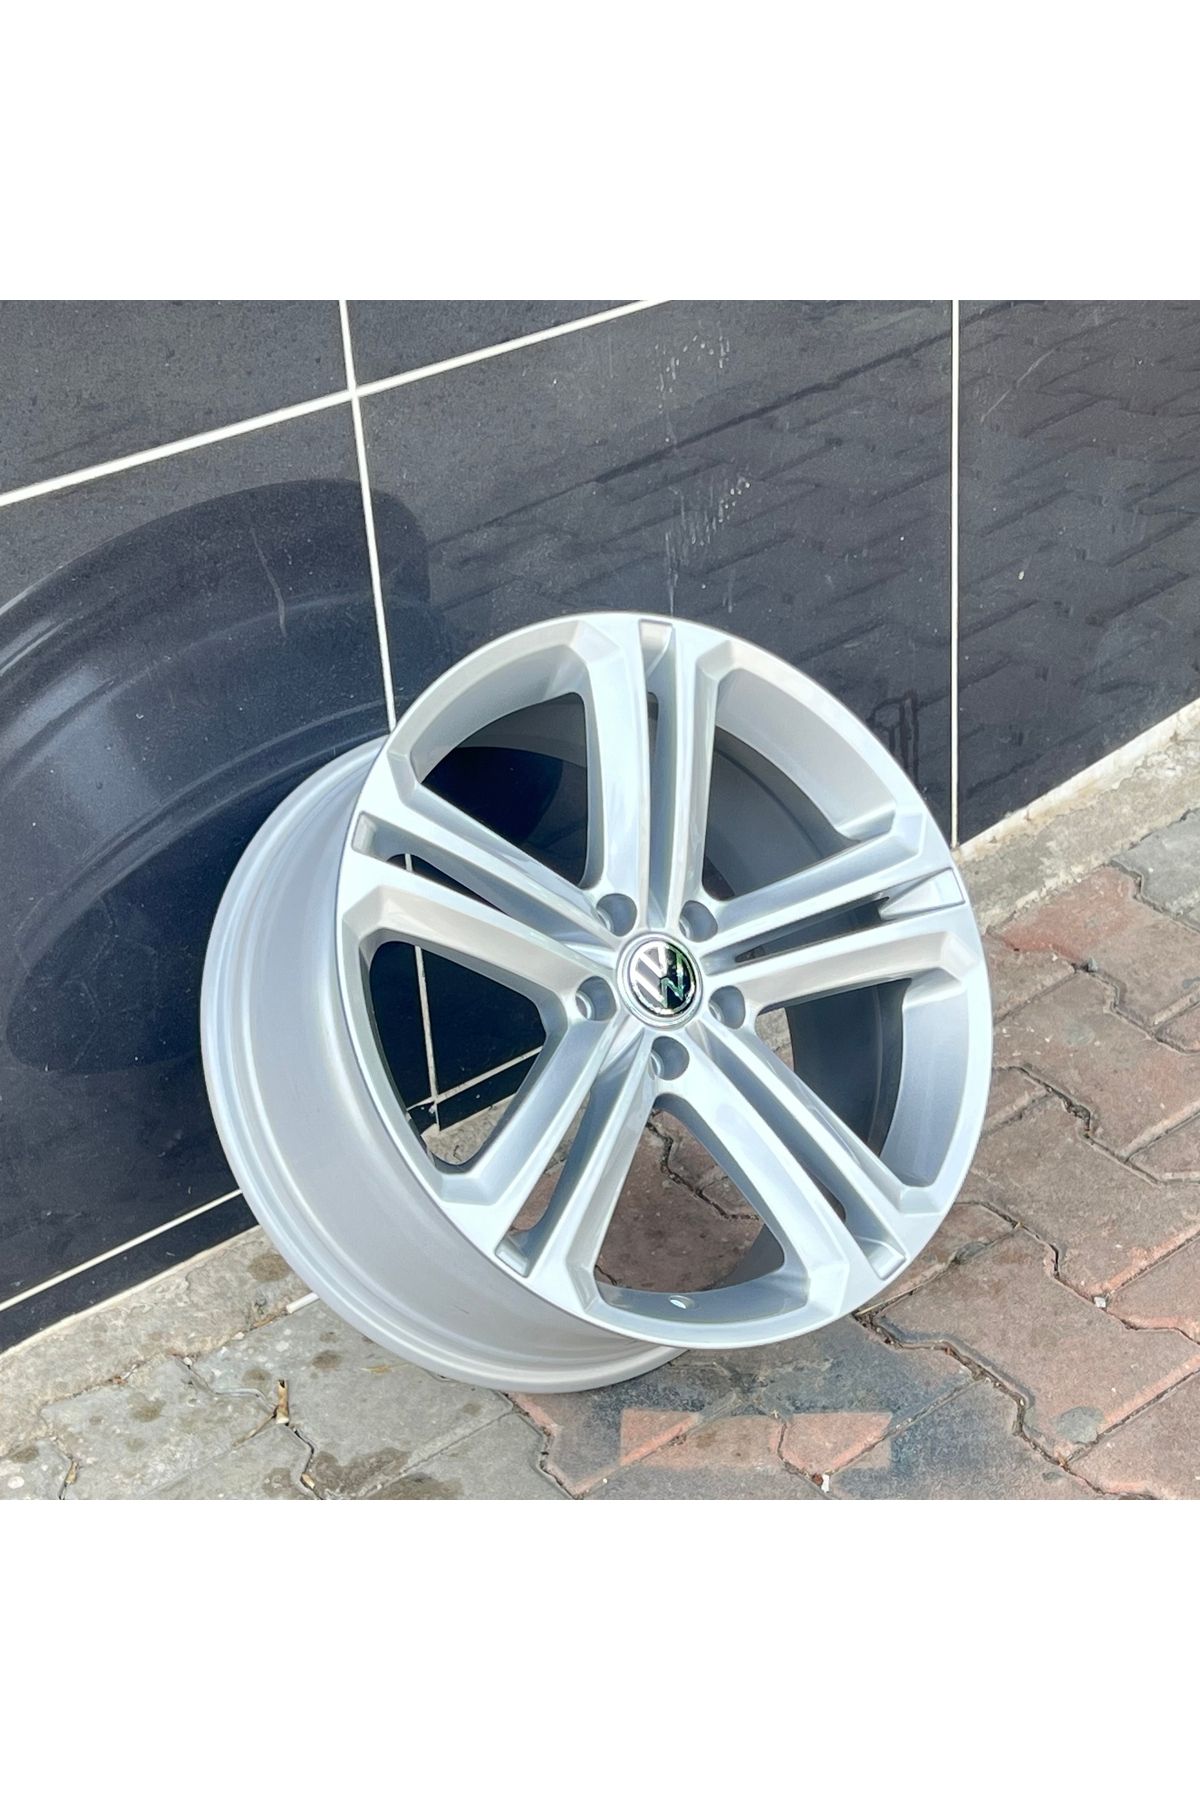 JANT 19 JANT 5X112 VOLKSWAGEN MALLORY